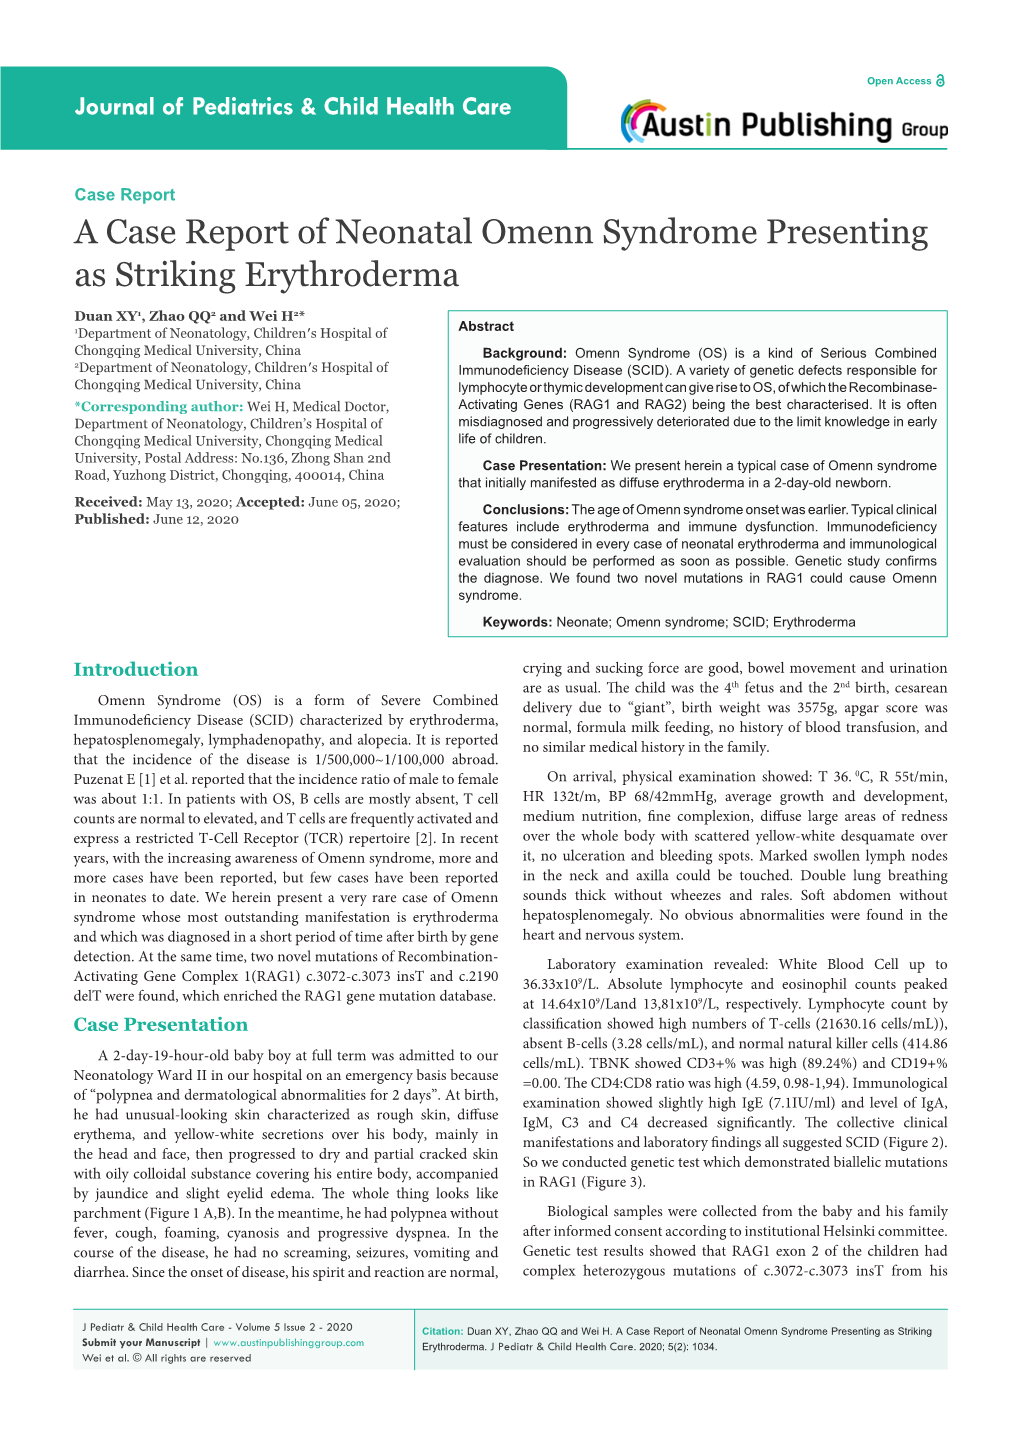 A Case Report of Neonatal Omenn Syndrome Presenting As Striking Erythroderma